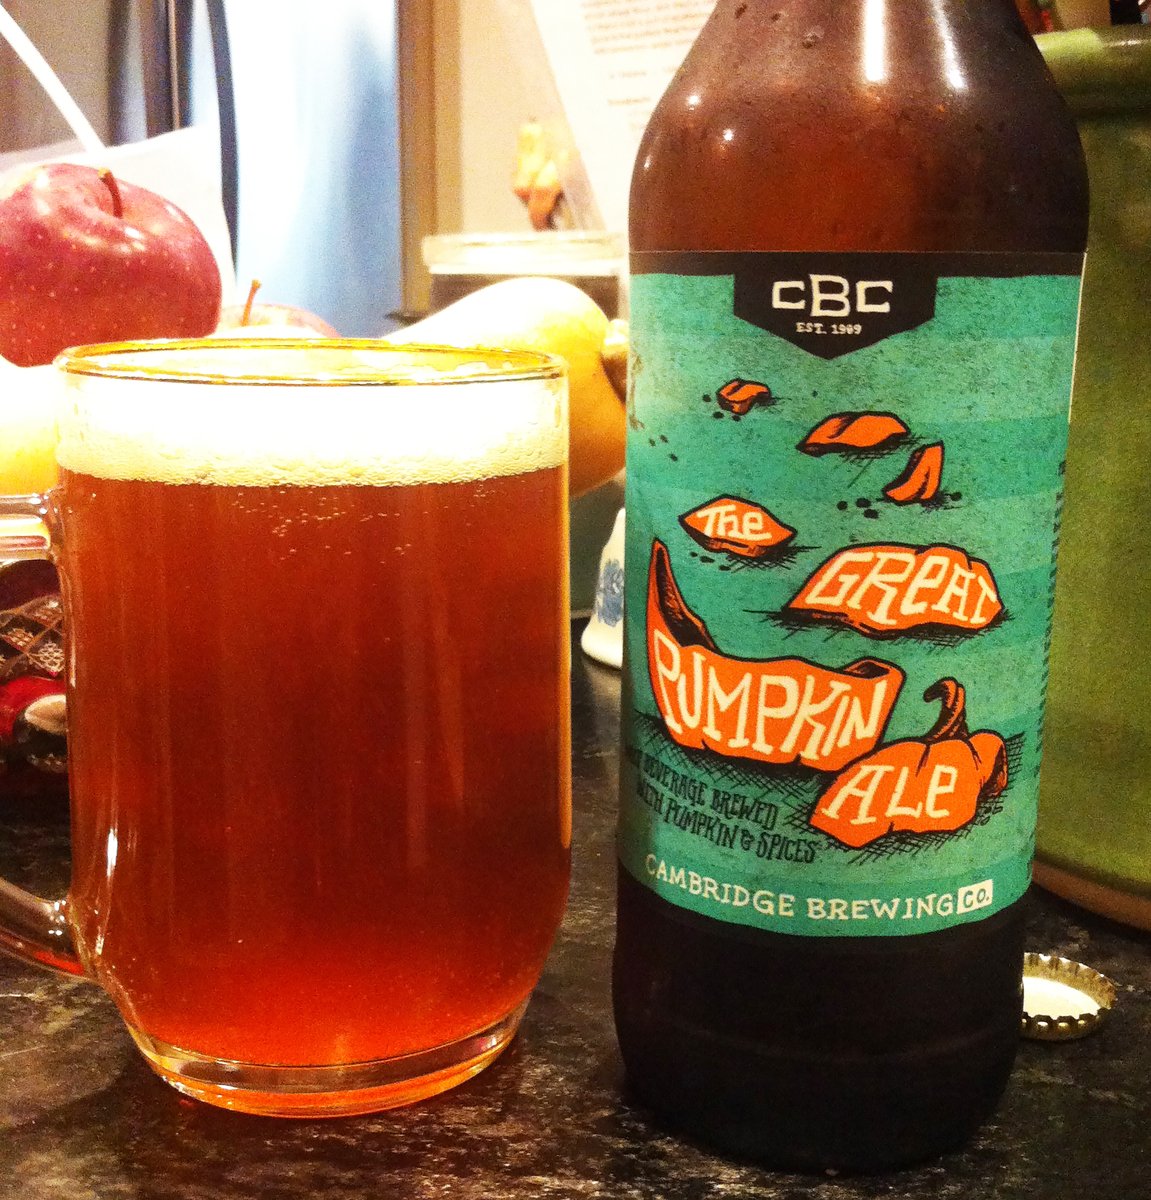 cambridge brewing co. the great pumpkin ale bottle and glass